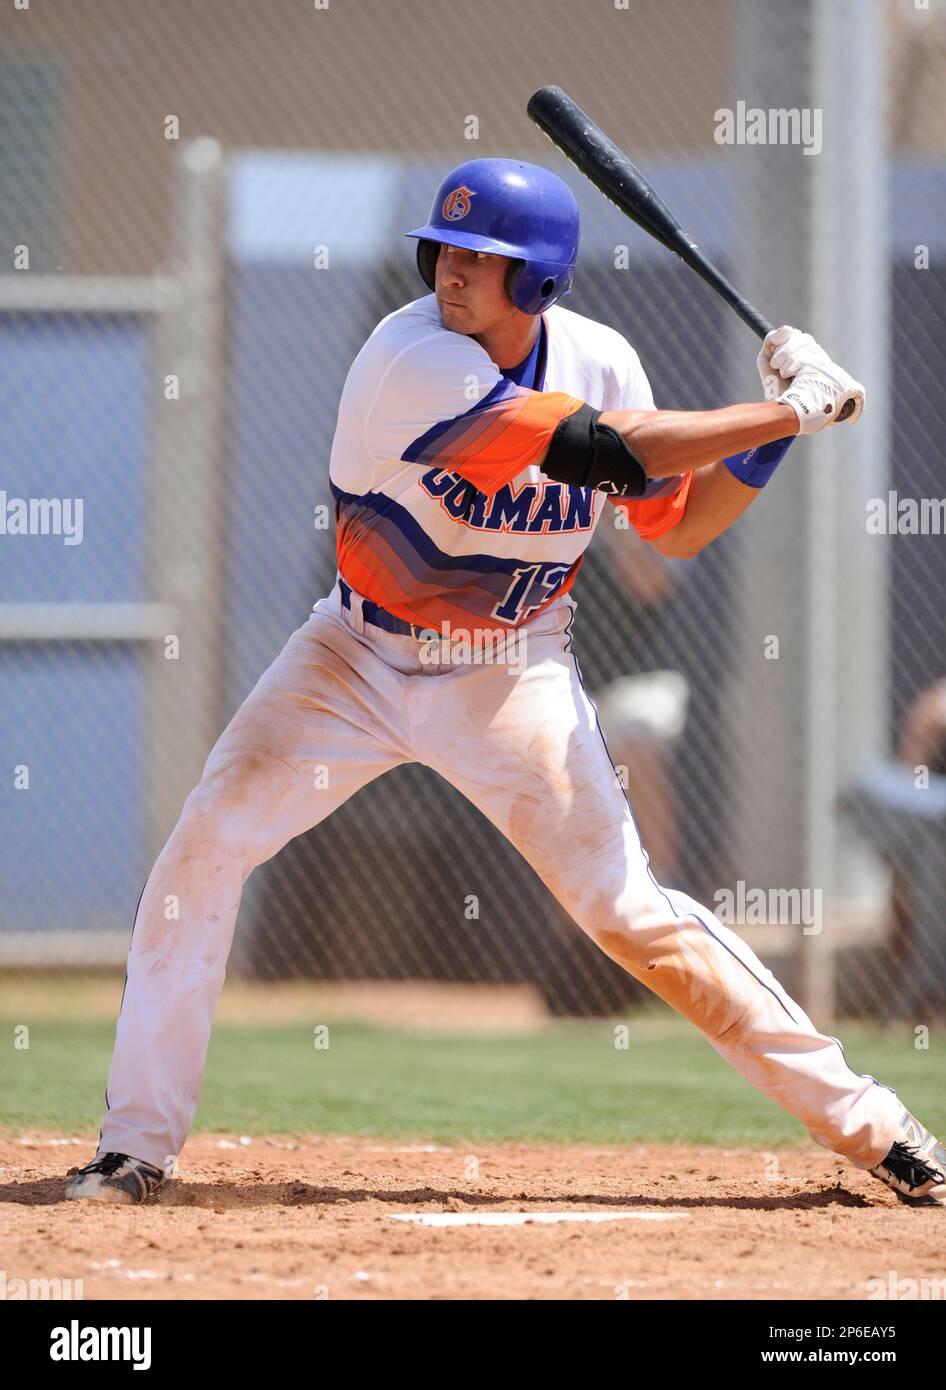 2012 MAY 10: Gorman's Joey Gallo (13), a possible 2012 1st round Major  League Baseball Draft pick during a high school baseball playoff game  between #3 USA Today Super 25/#7 ESPN POWERADE